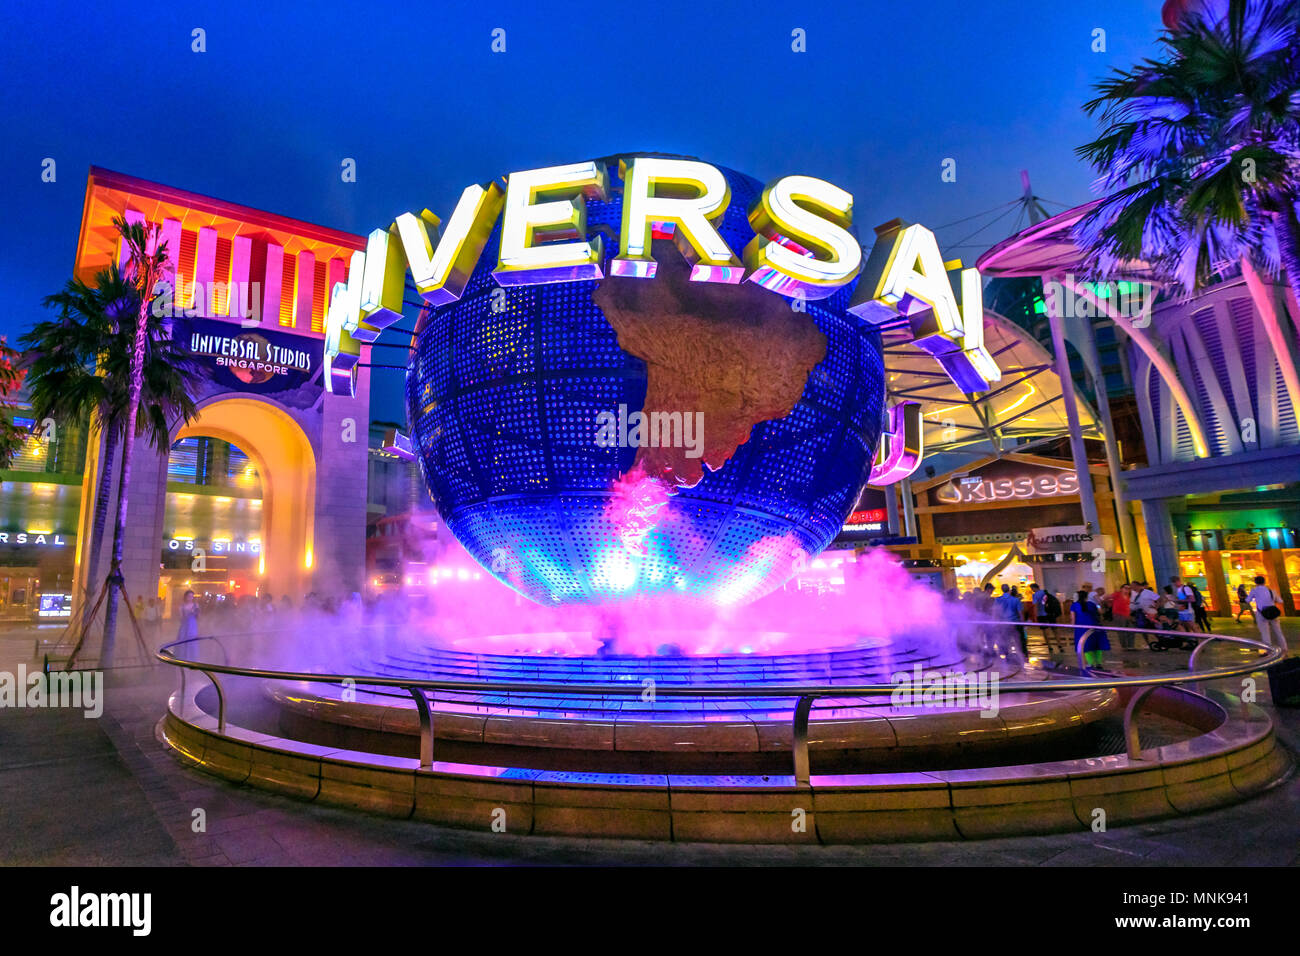 Singapore - May 2, 2018: Universal Studios with luminous globe in Sentosa island at blue hour with pink lights. Universal Studios Singapore is southeast Asia's first Hollywood movie theme park. Stock Photo